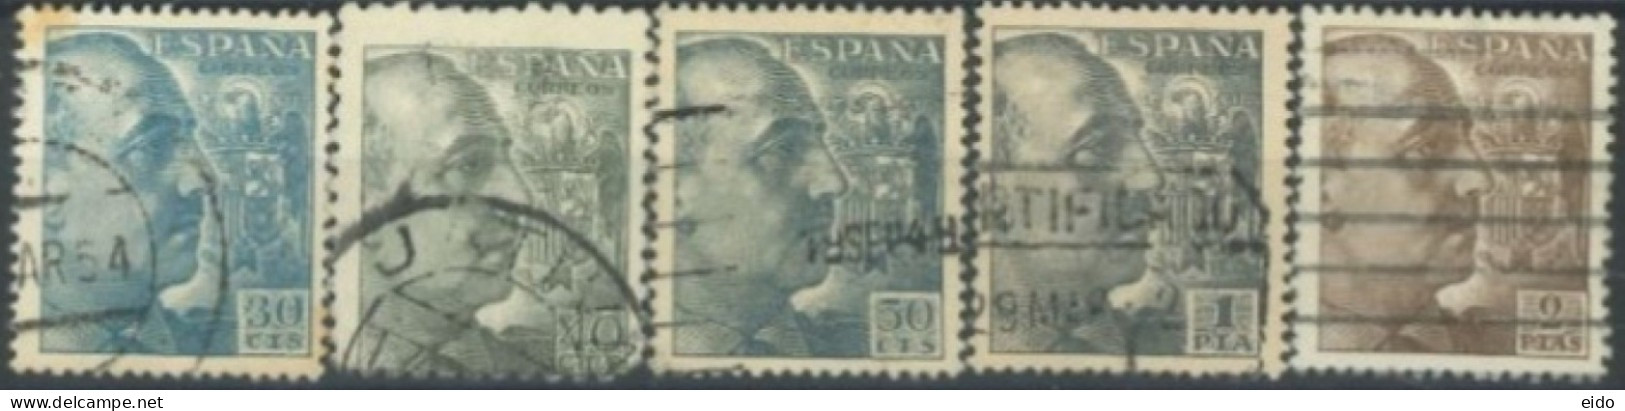 SPAIN, 1939/40, GENERAL FRANCISCO FRANCO STAMPS SET OF 5, USED. - Gebraucht